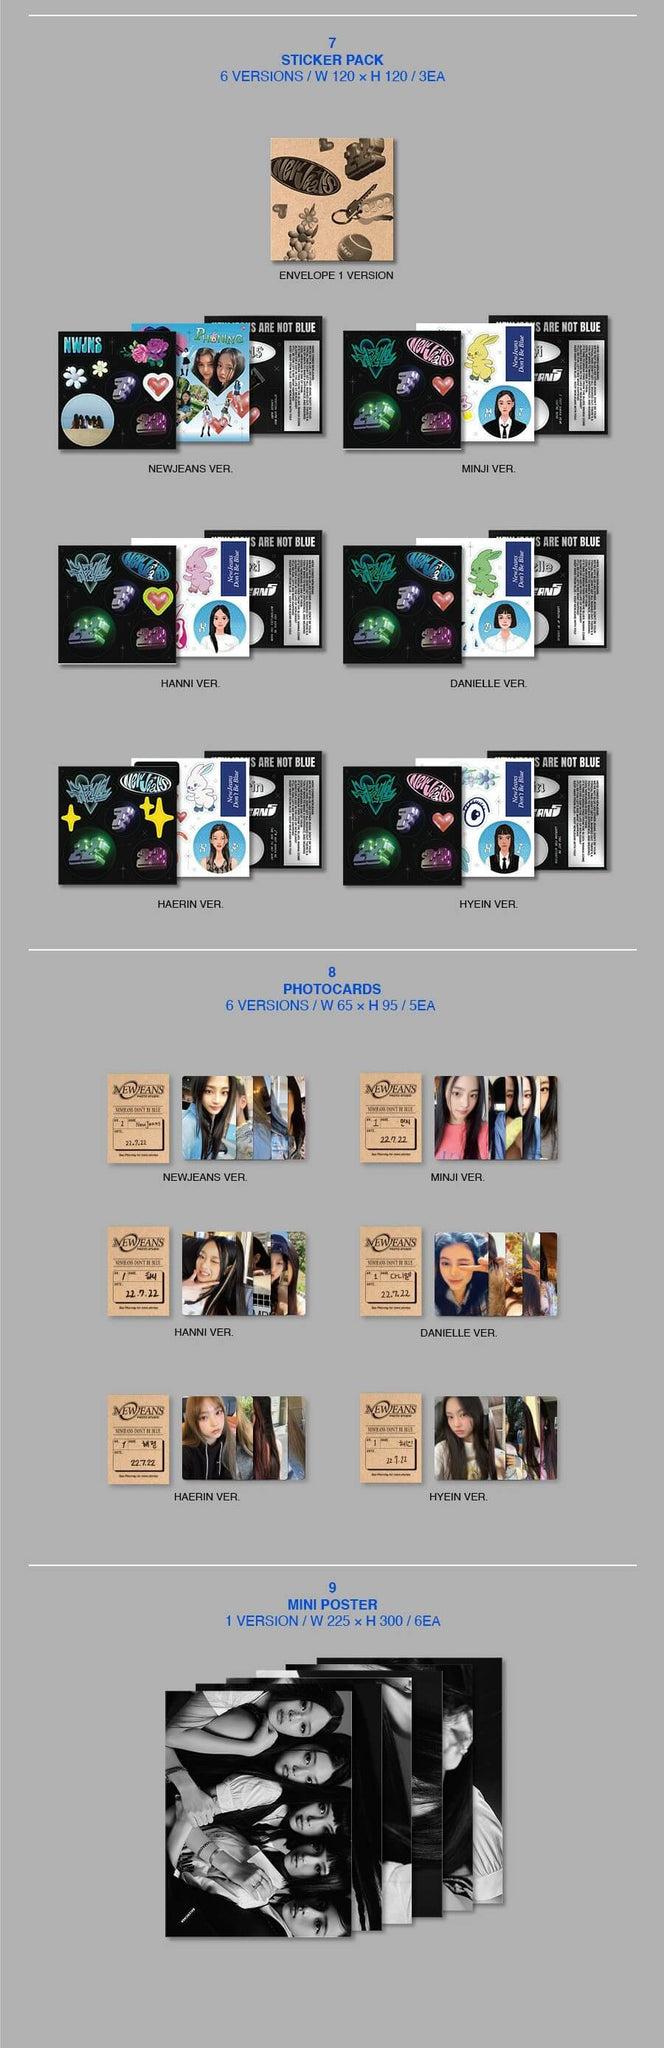 NewJeans New Jeans (Bluebook Version) Inclusions Sticker Pack Photocards Mini Poster